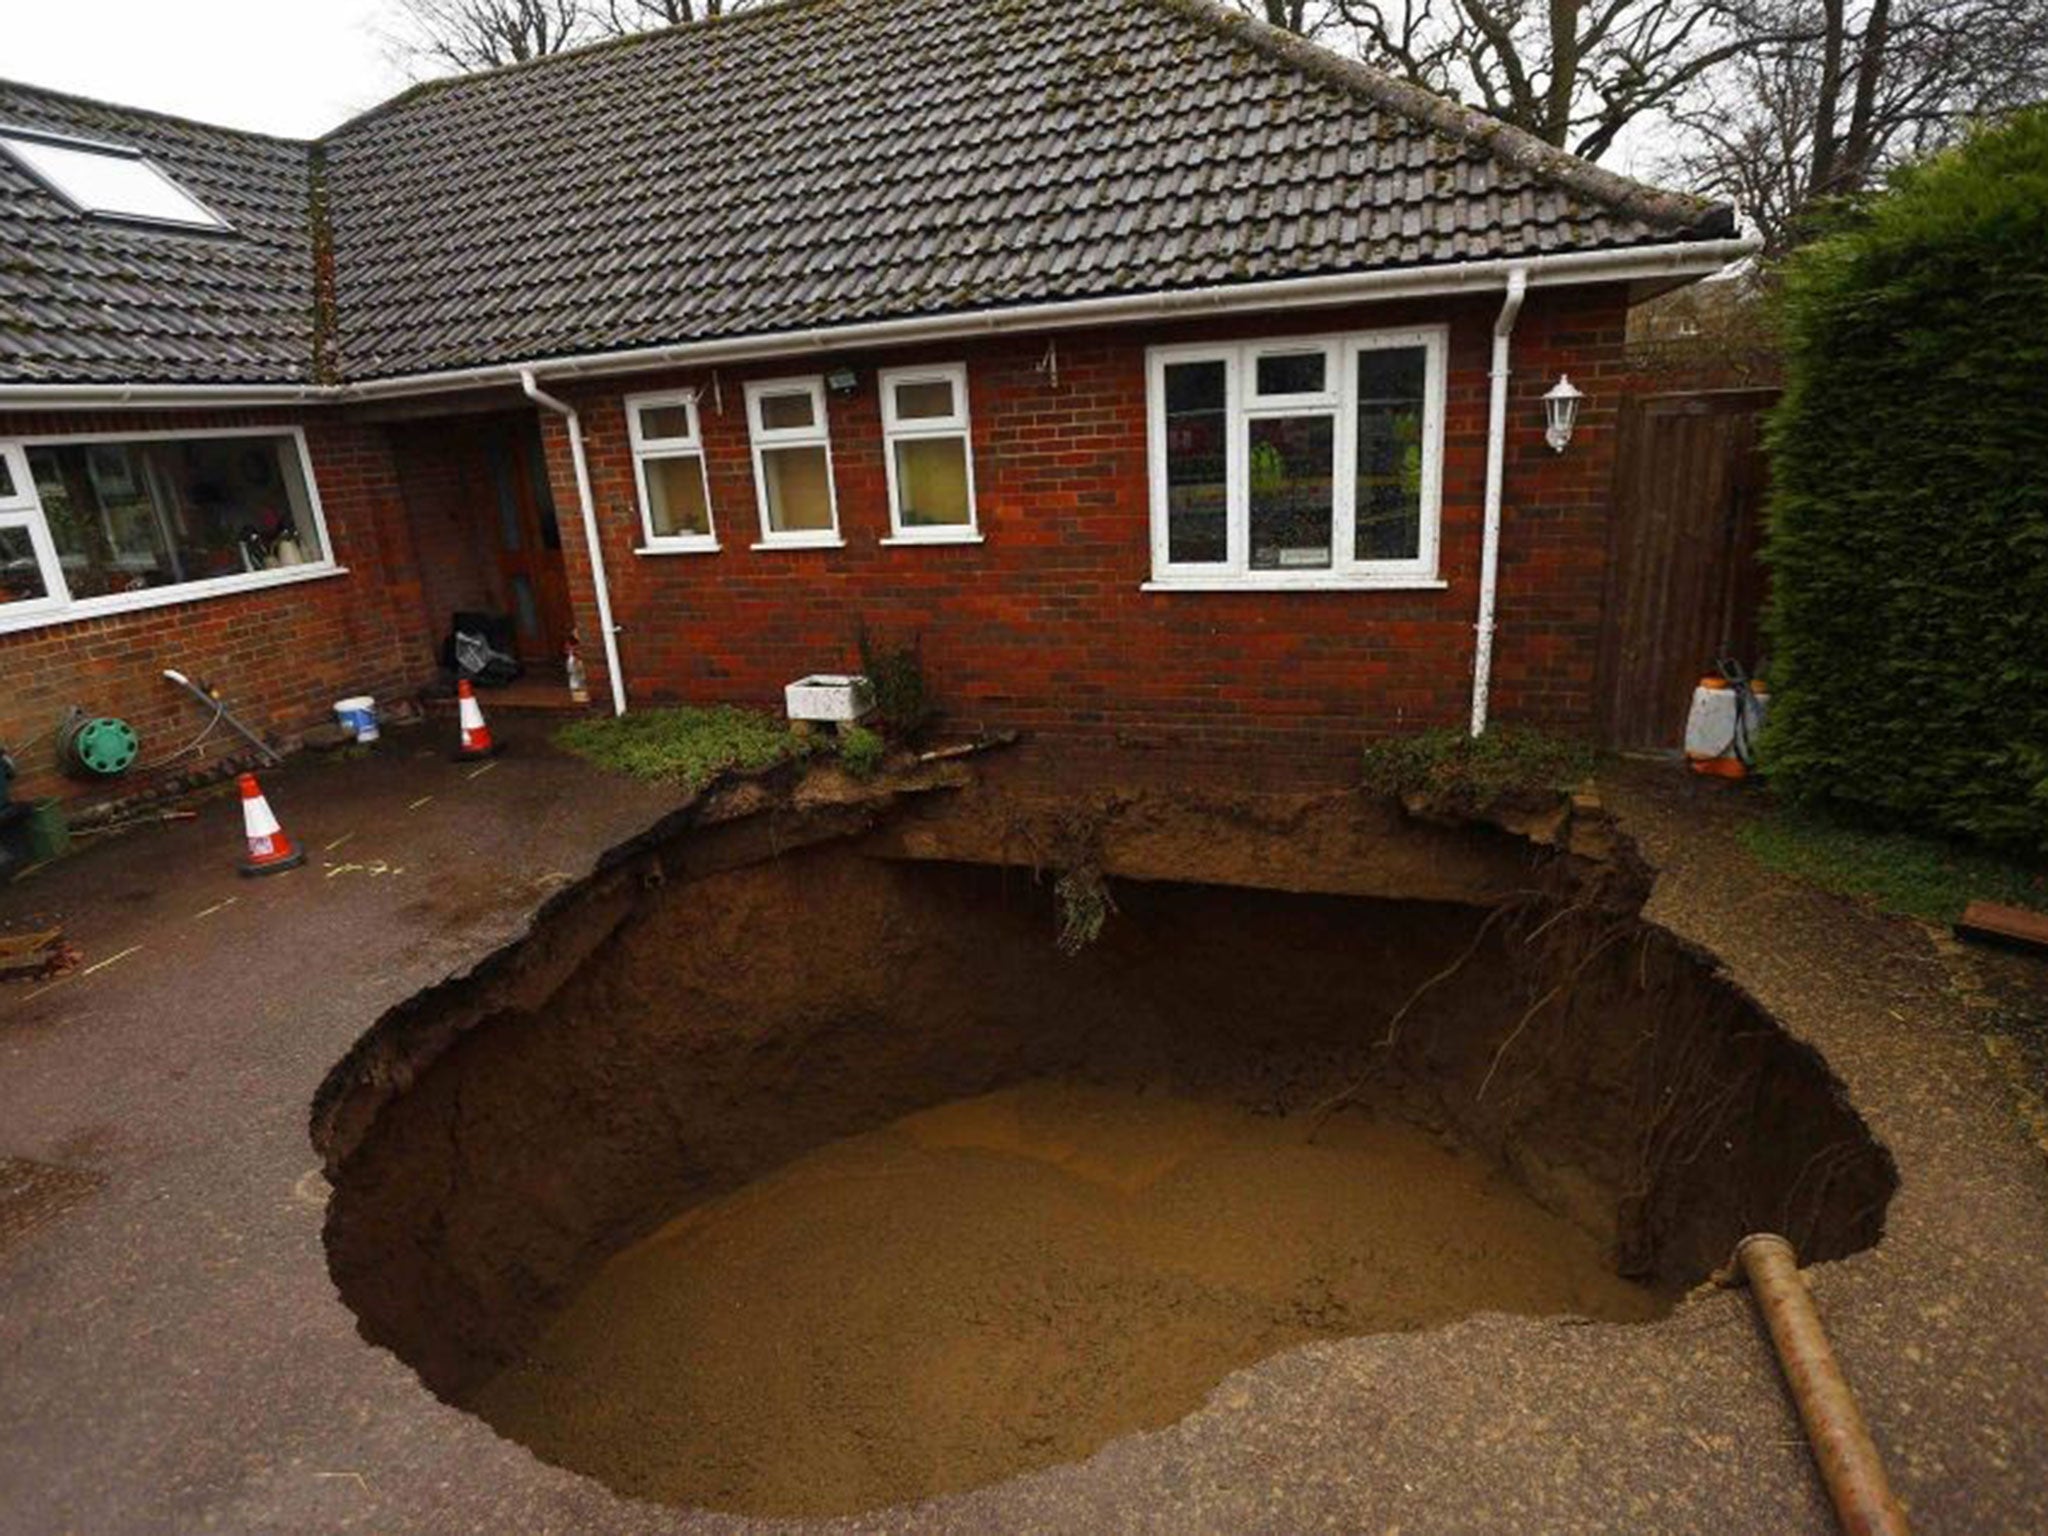 The 15-ft sinkhole in Walters Ash, Buckinghamshire, is being filled with concrete